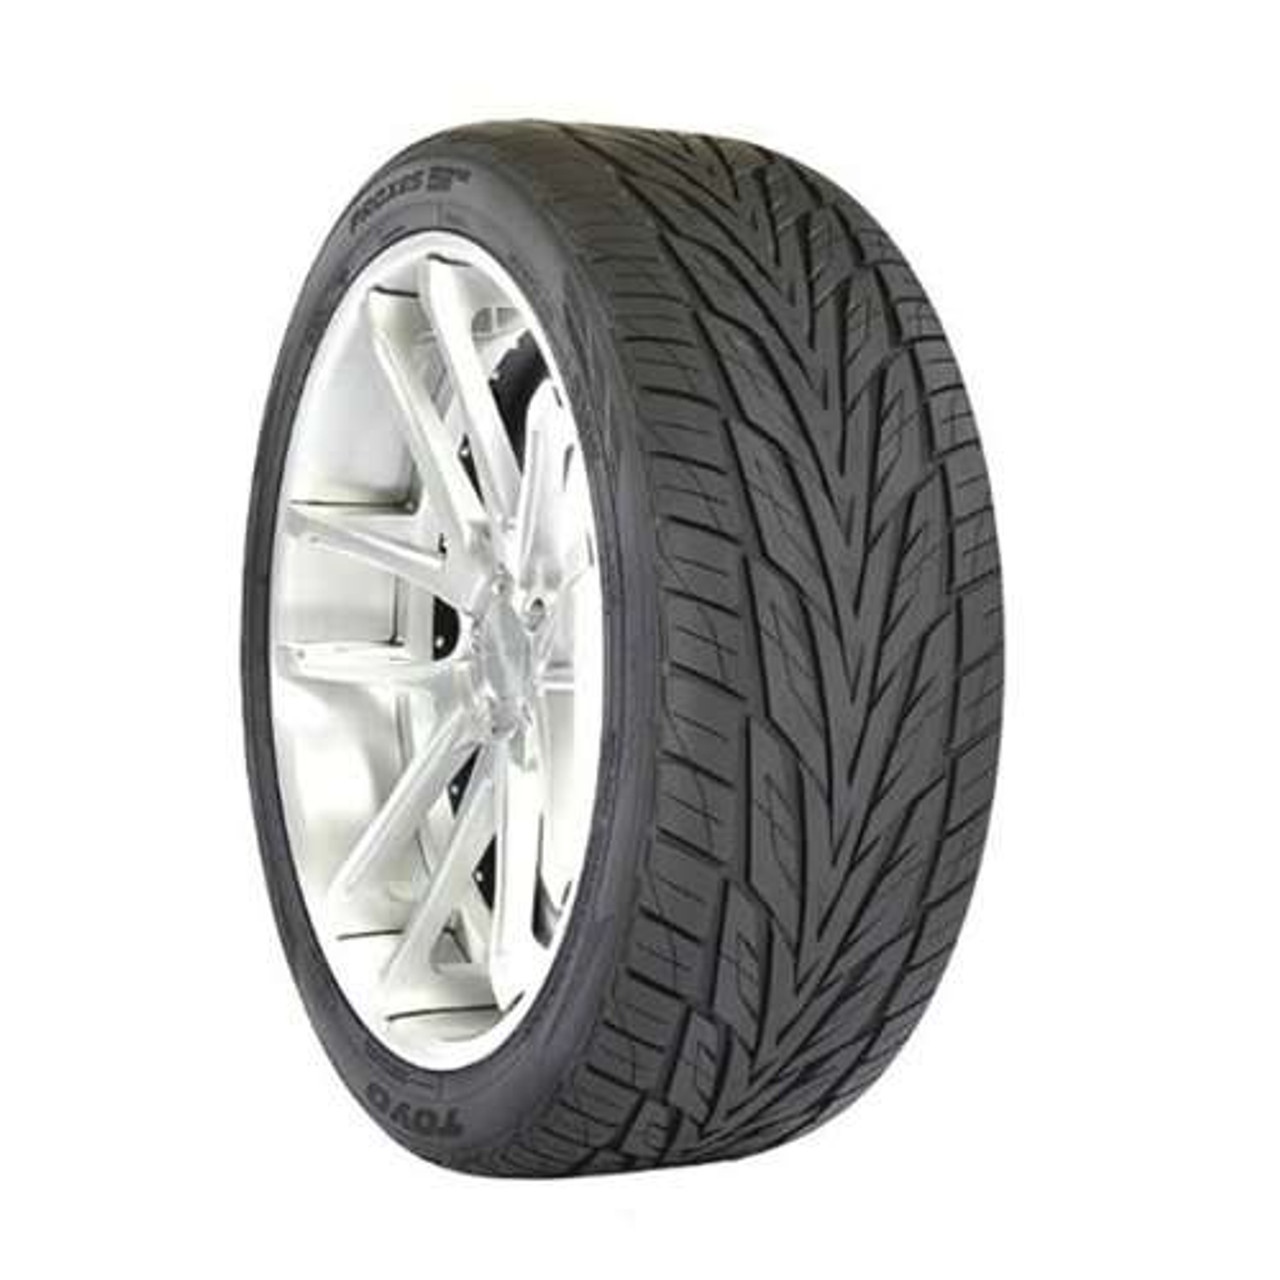 Toyo Proxes ST III Tire 305/40R22 114V 500AA BW - FREE T-SHIRT INCLUDED!